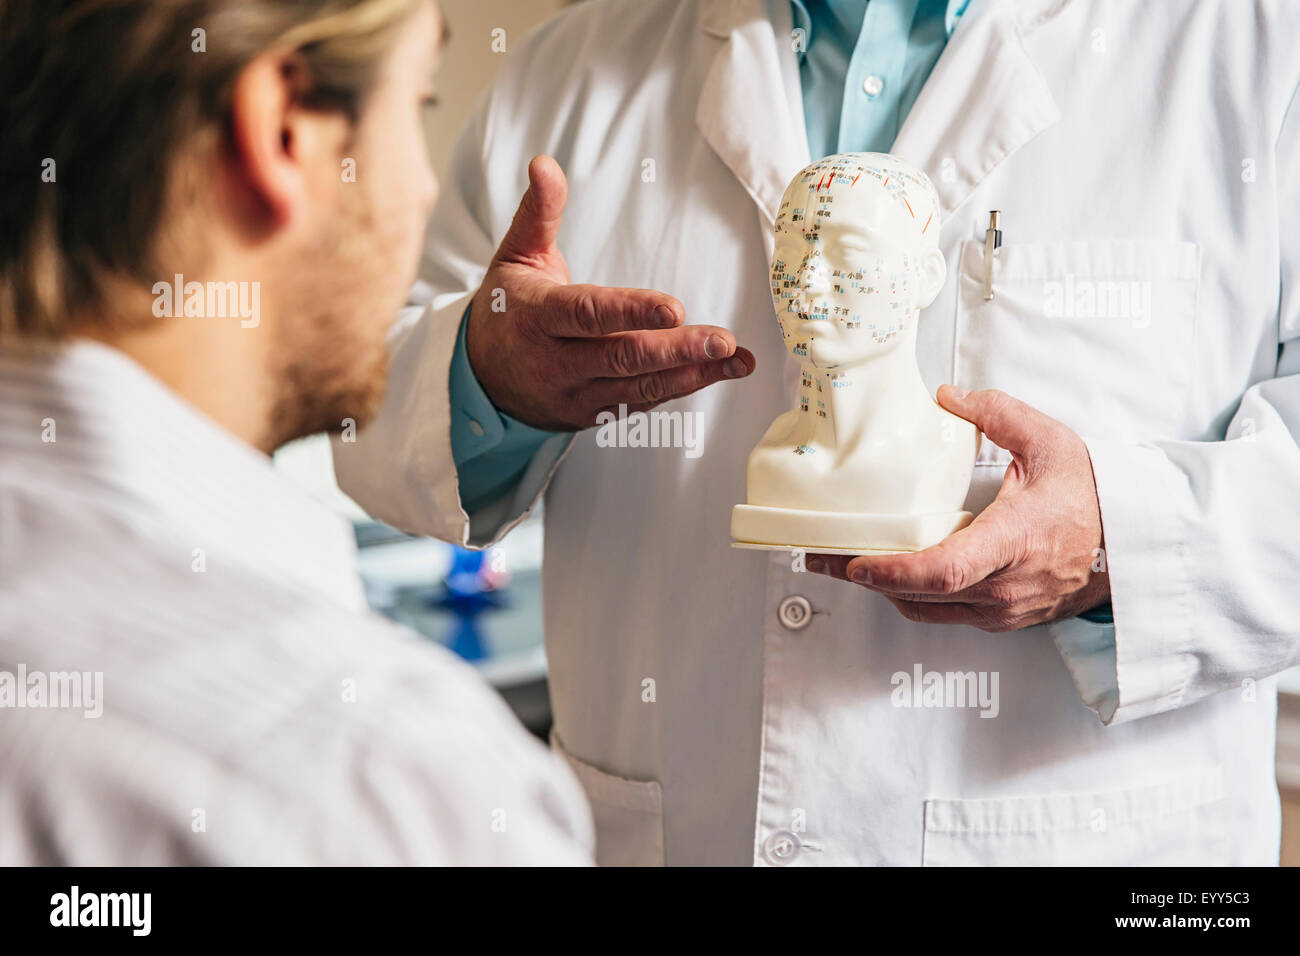 Caucasian acupuncturist showing patient carved bust with diagram Stock Photo